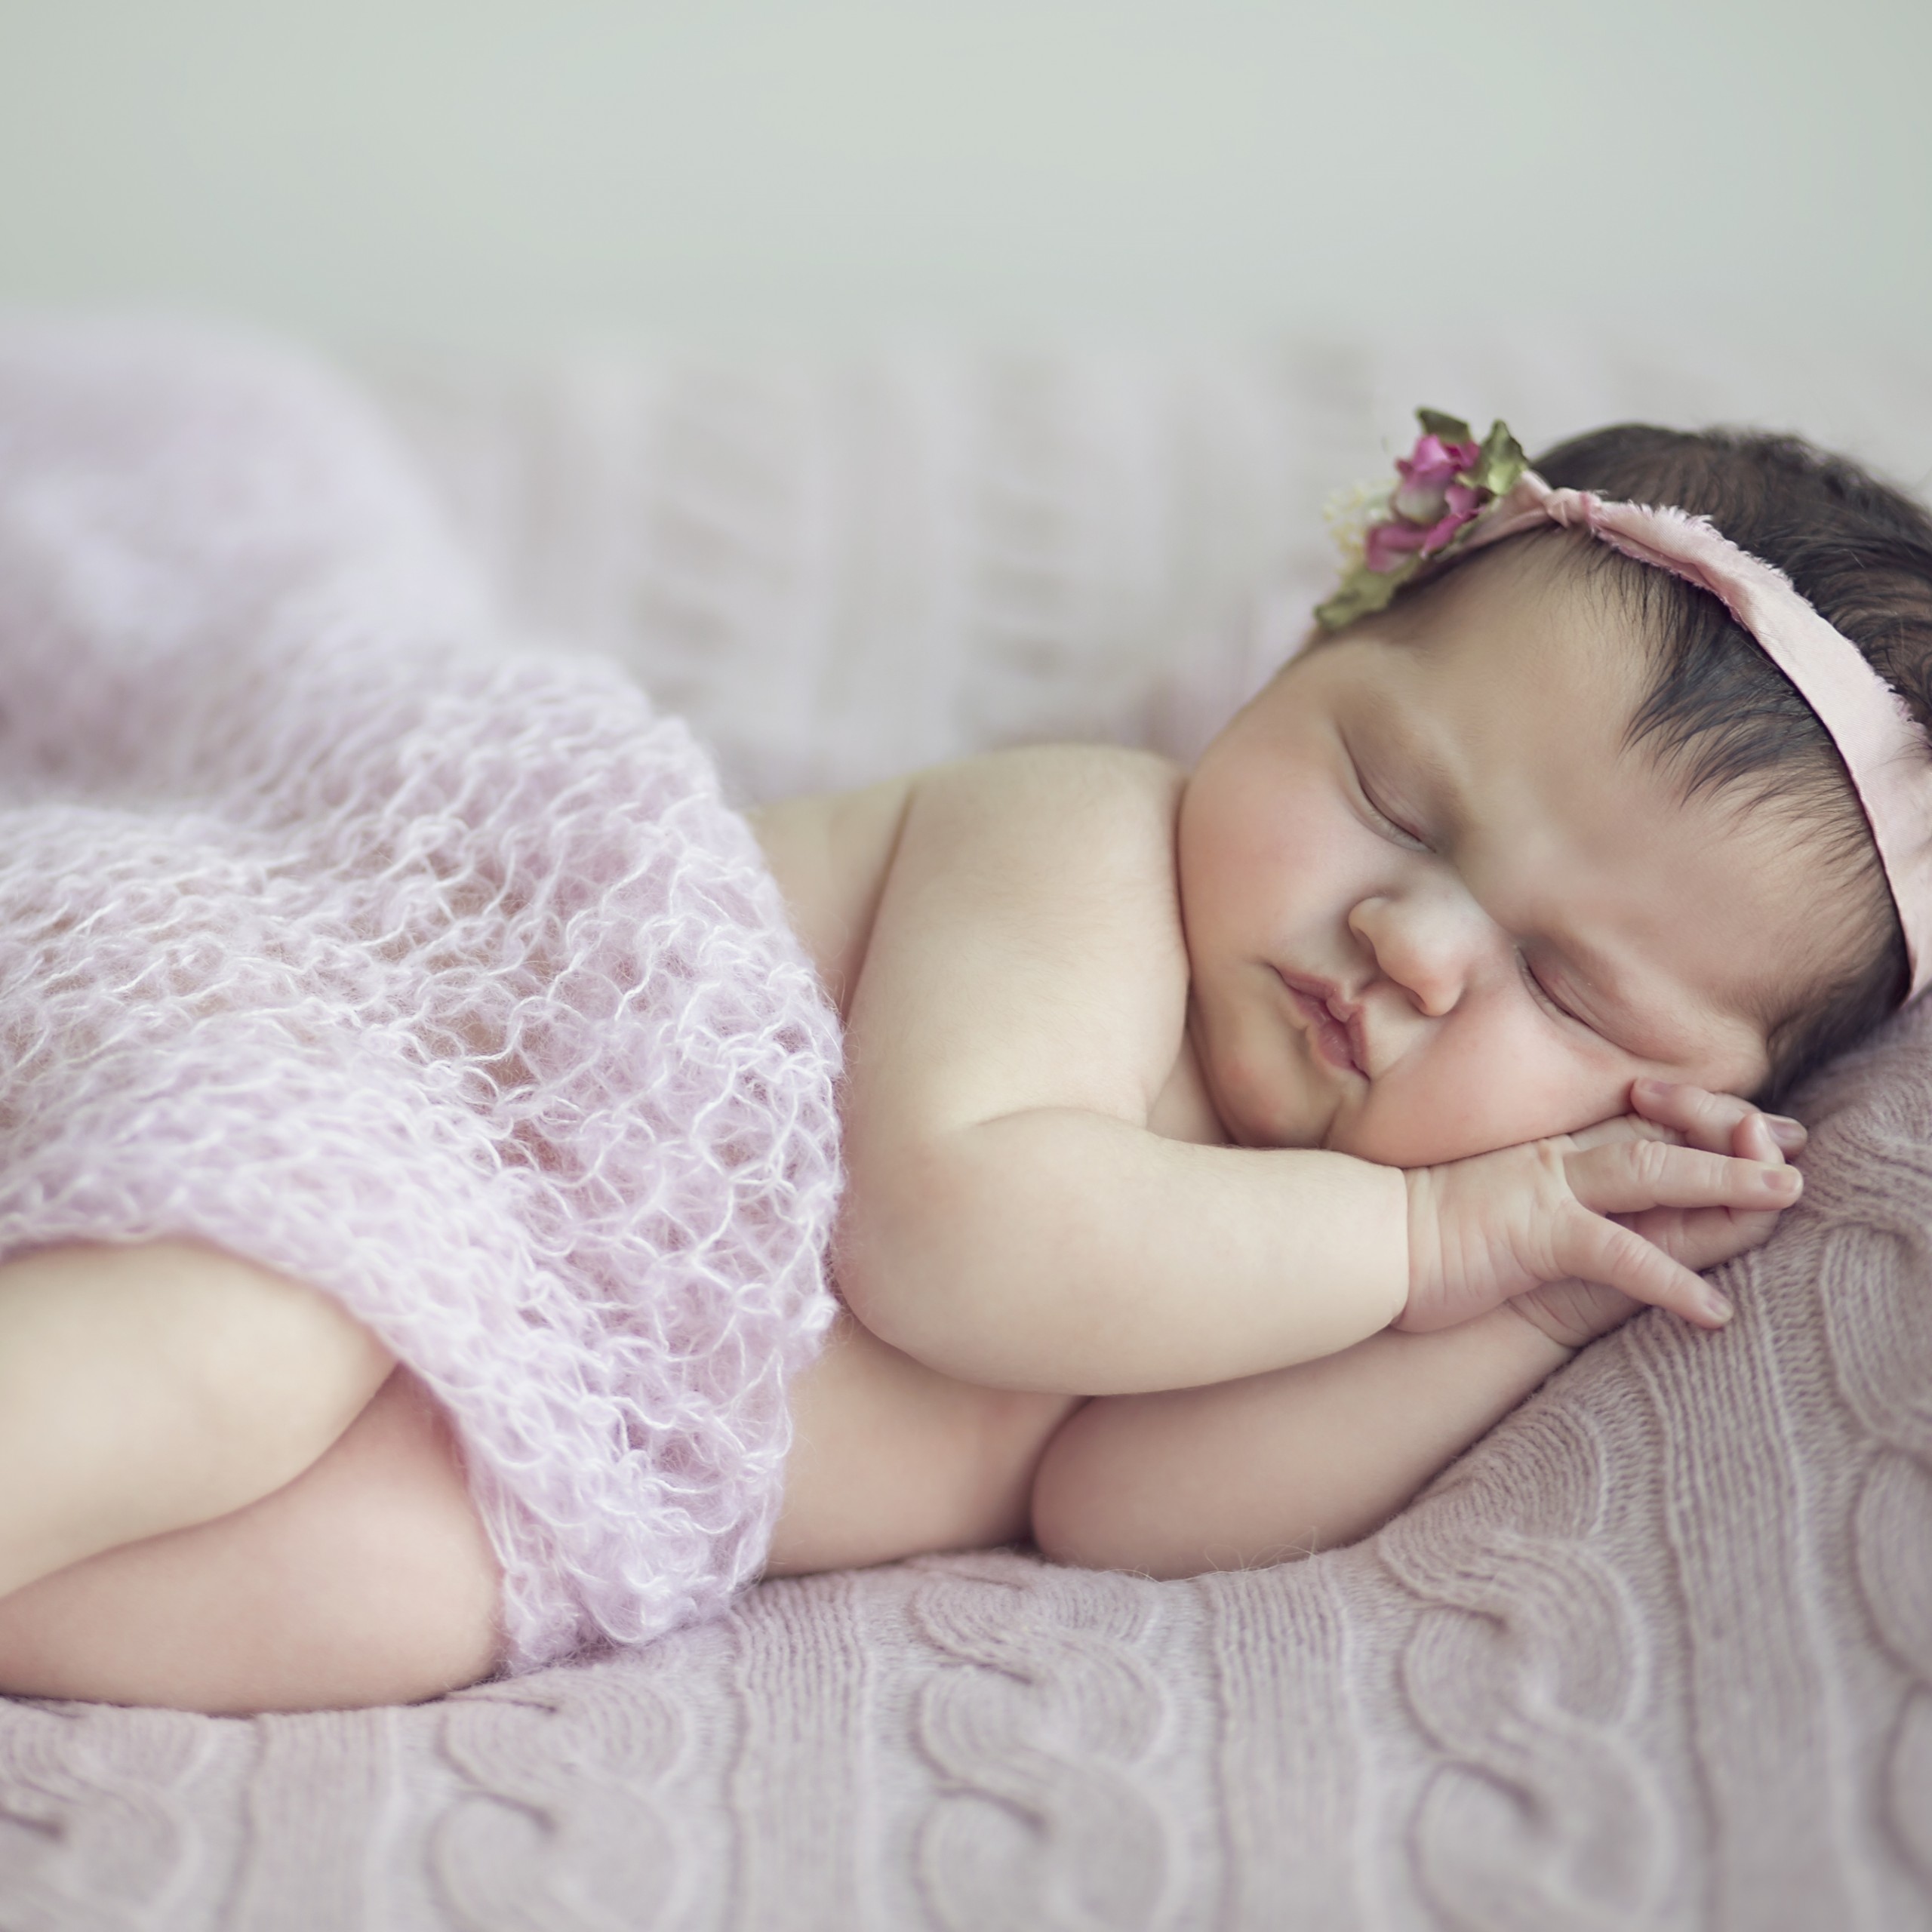 small baby wallpaper,child,baby,photograph,pink,skin